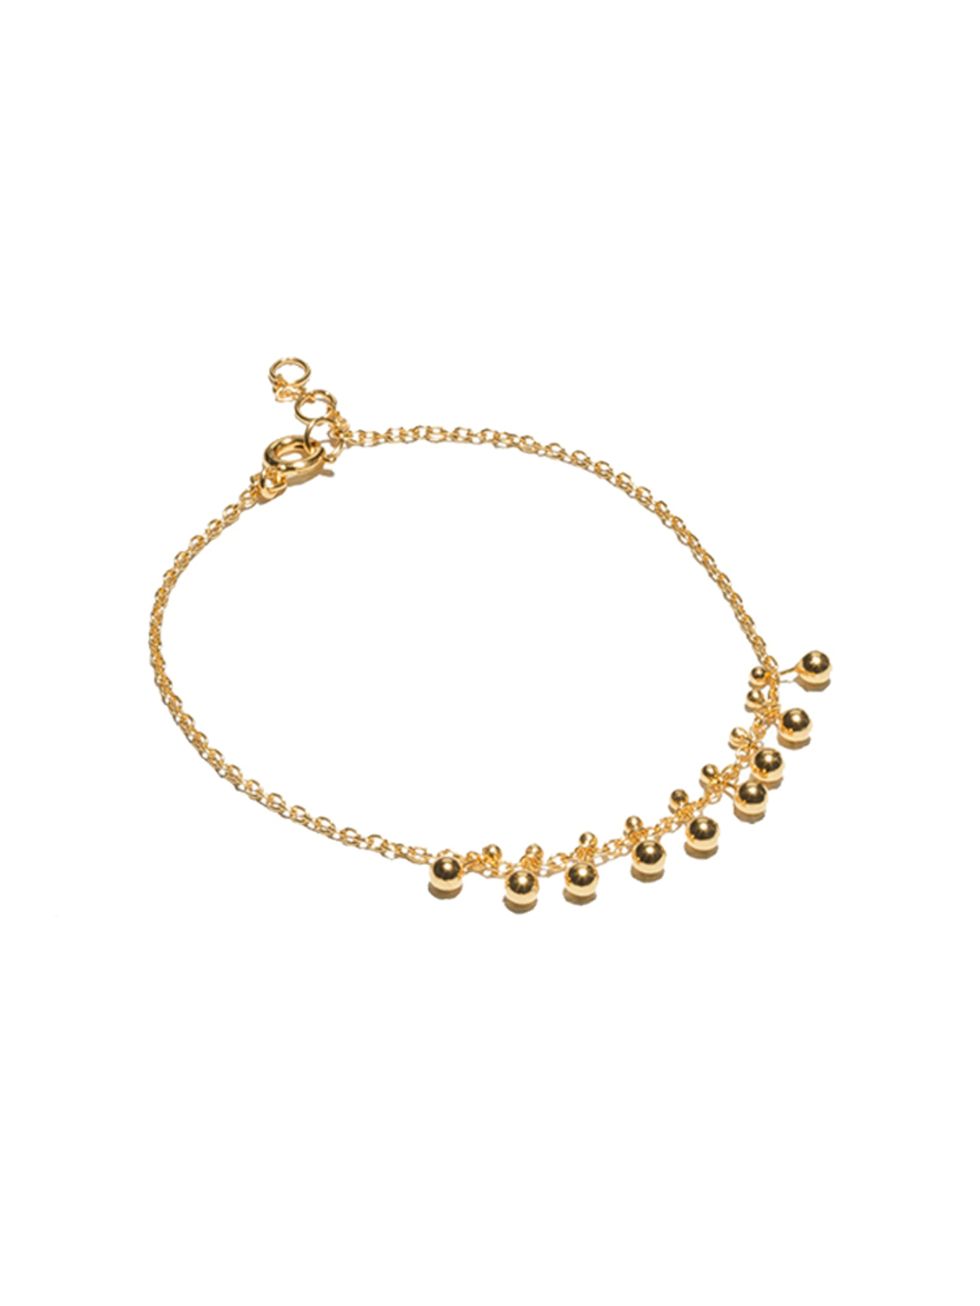 <p>This delicate bracelet caught Accessories Editor Donna Wallace's eye. </p>

<p><a href="http://www.stories.com/gb/Jewellery/Bracelets/Gold-Plated_Sterling_Silver_Bracelet/582804-102341775.1" target="_blank">&Other Stories</a> bracelet, £39</p>